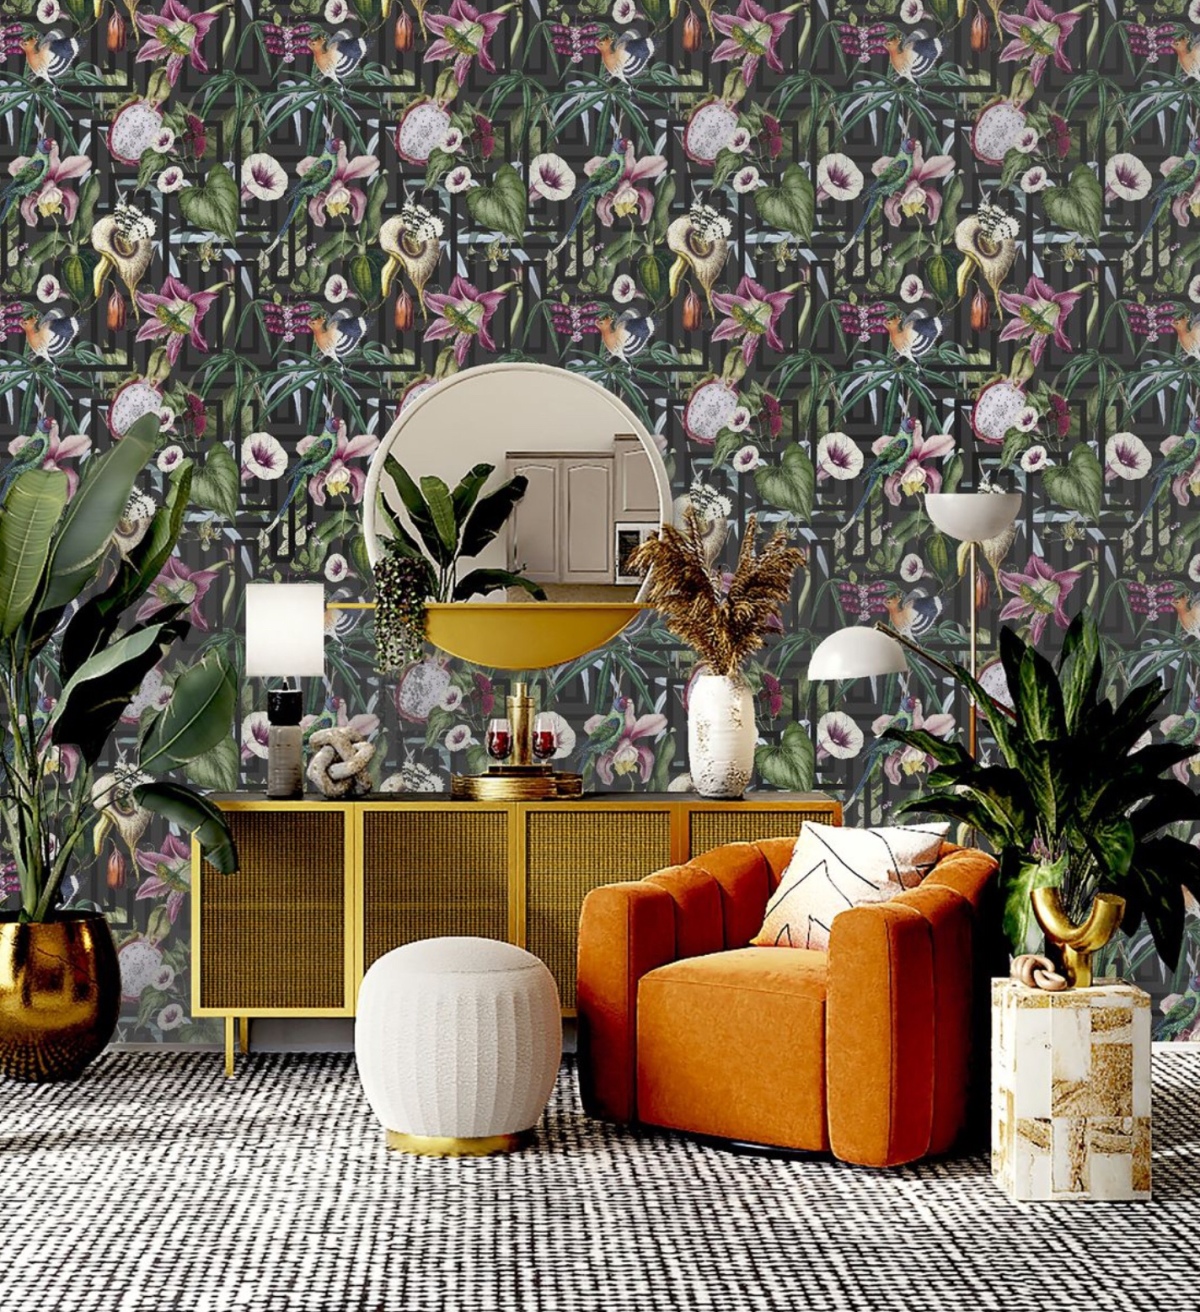 Paul Moneypenny teams up with The Range to give wallpapers a tropical makeover for Spring/Summer 2022